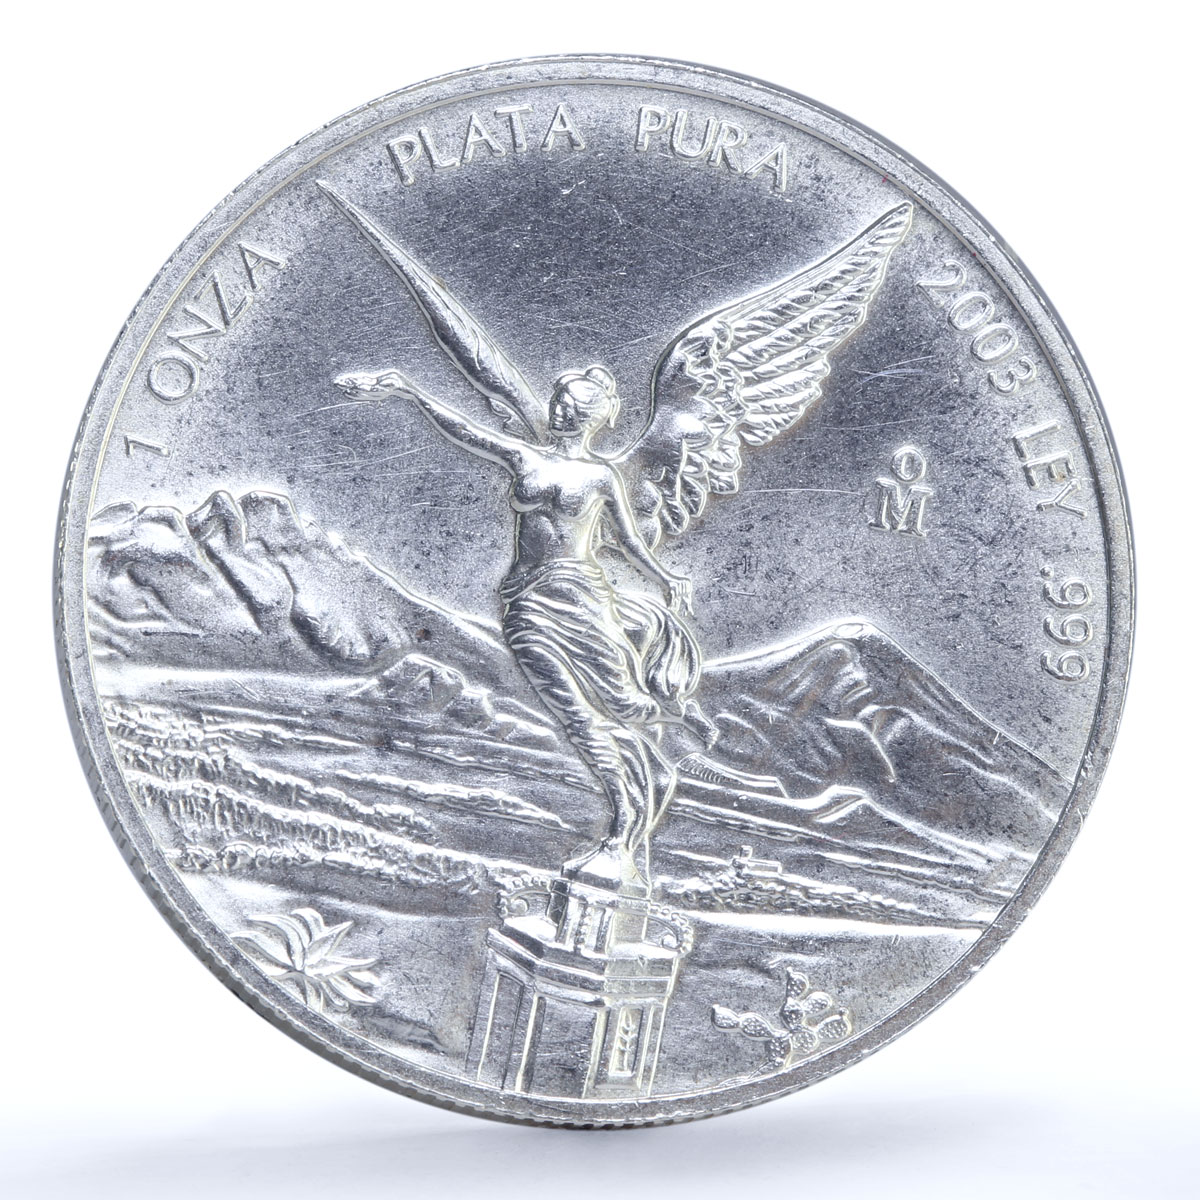 Mexico 1 onza Libertad Angel of Independence silver coin 2003